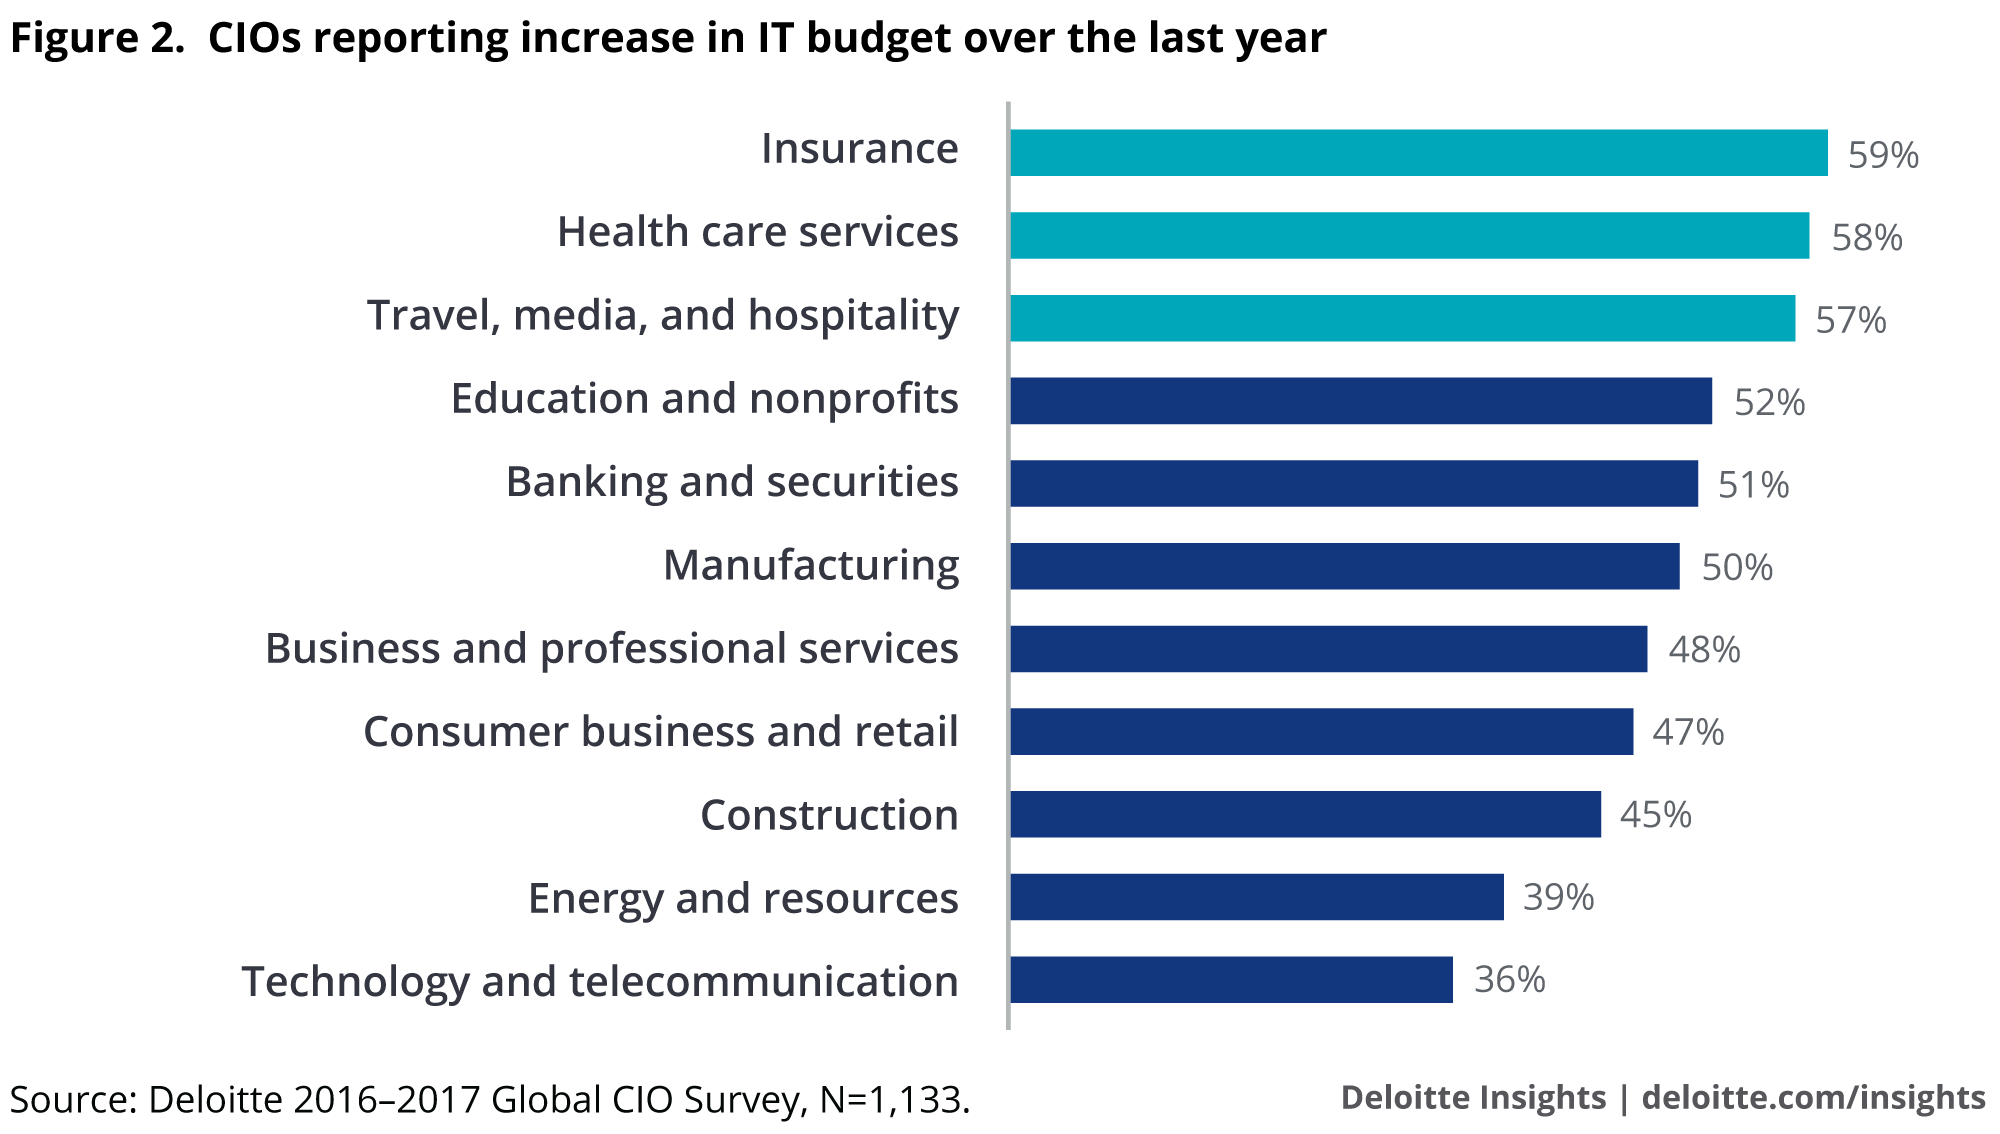 CIOs reporting increase in IT budget over the last year